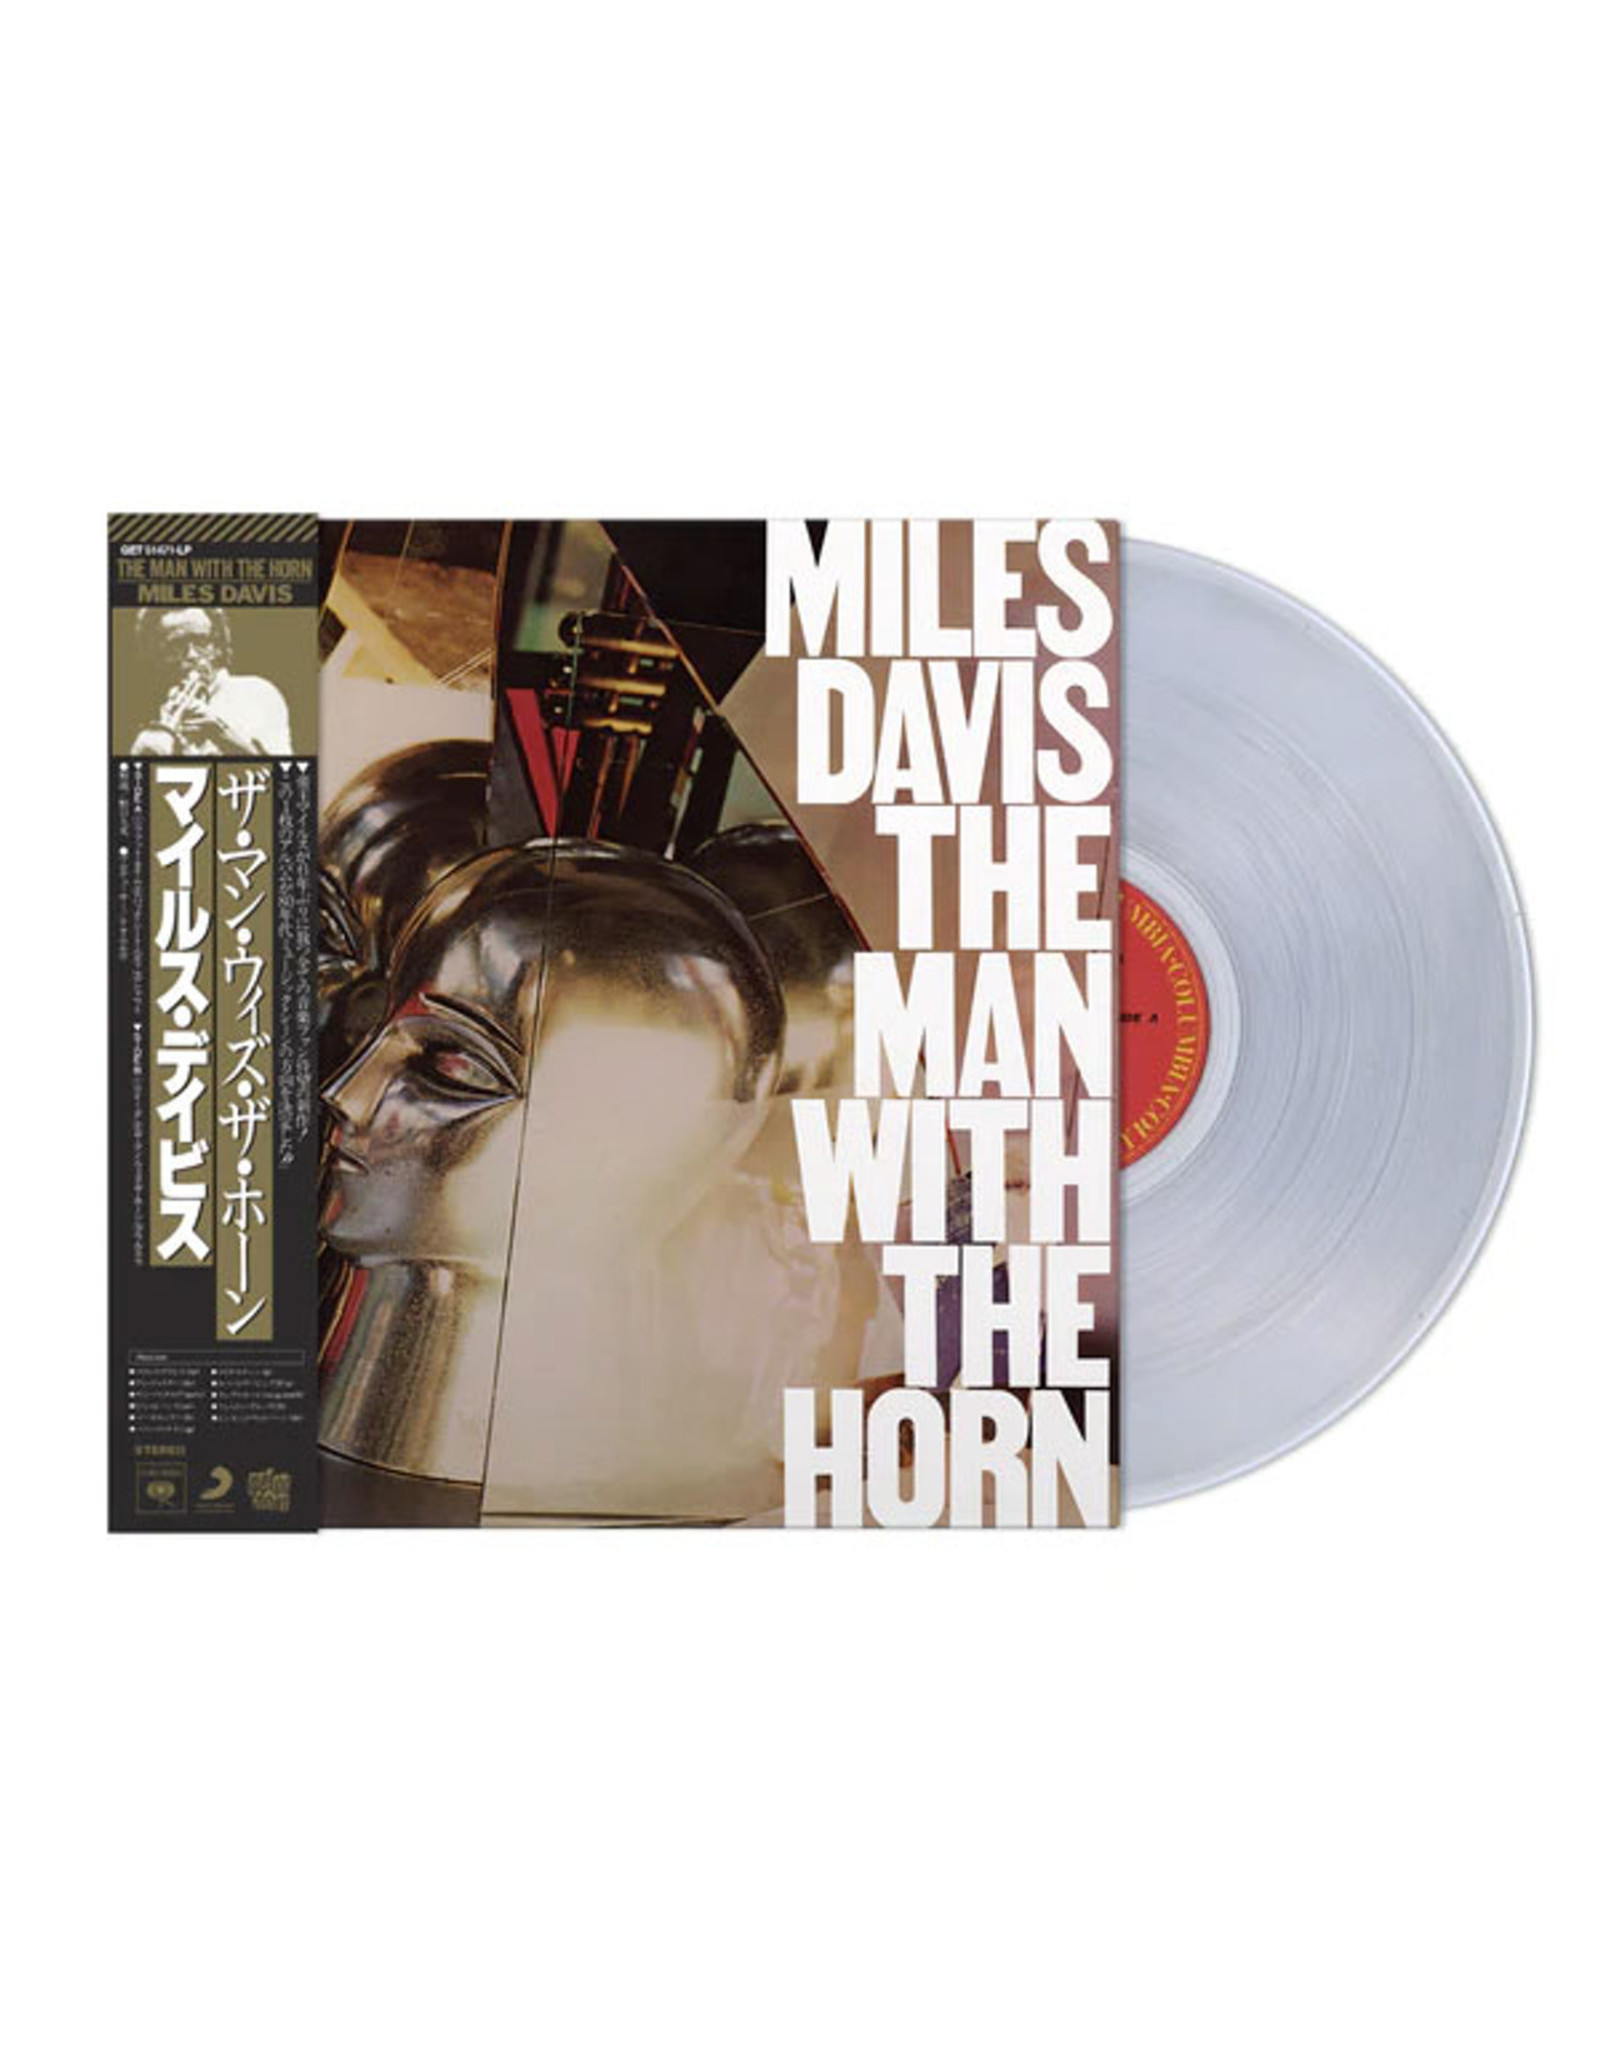 Miles Davis - The Man With The Horn (40th Anniversary) [Crystal Clear Vinyl]